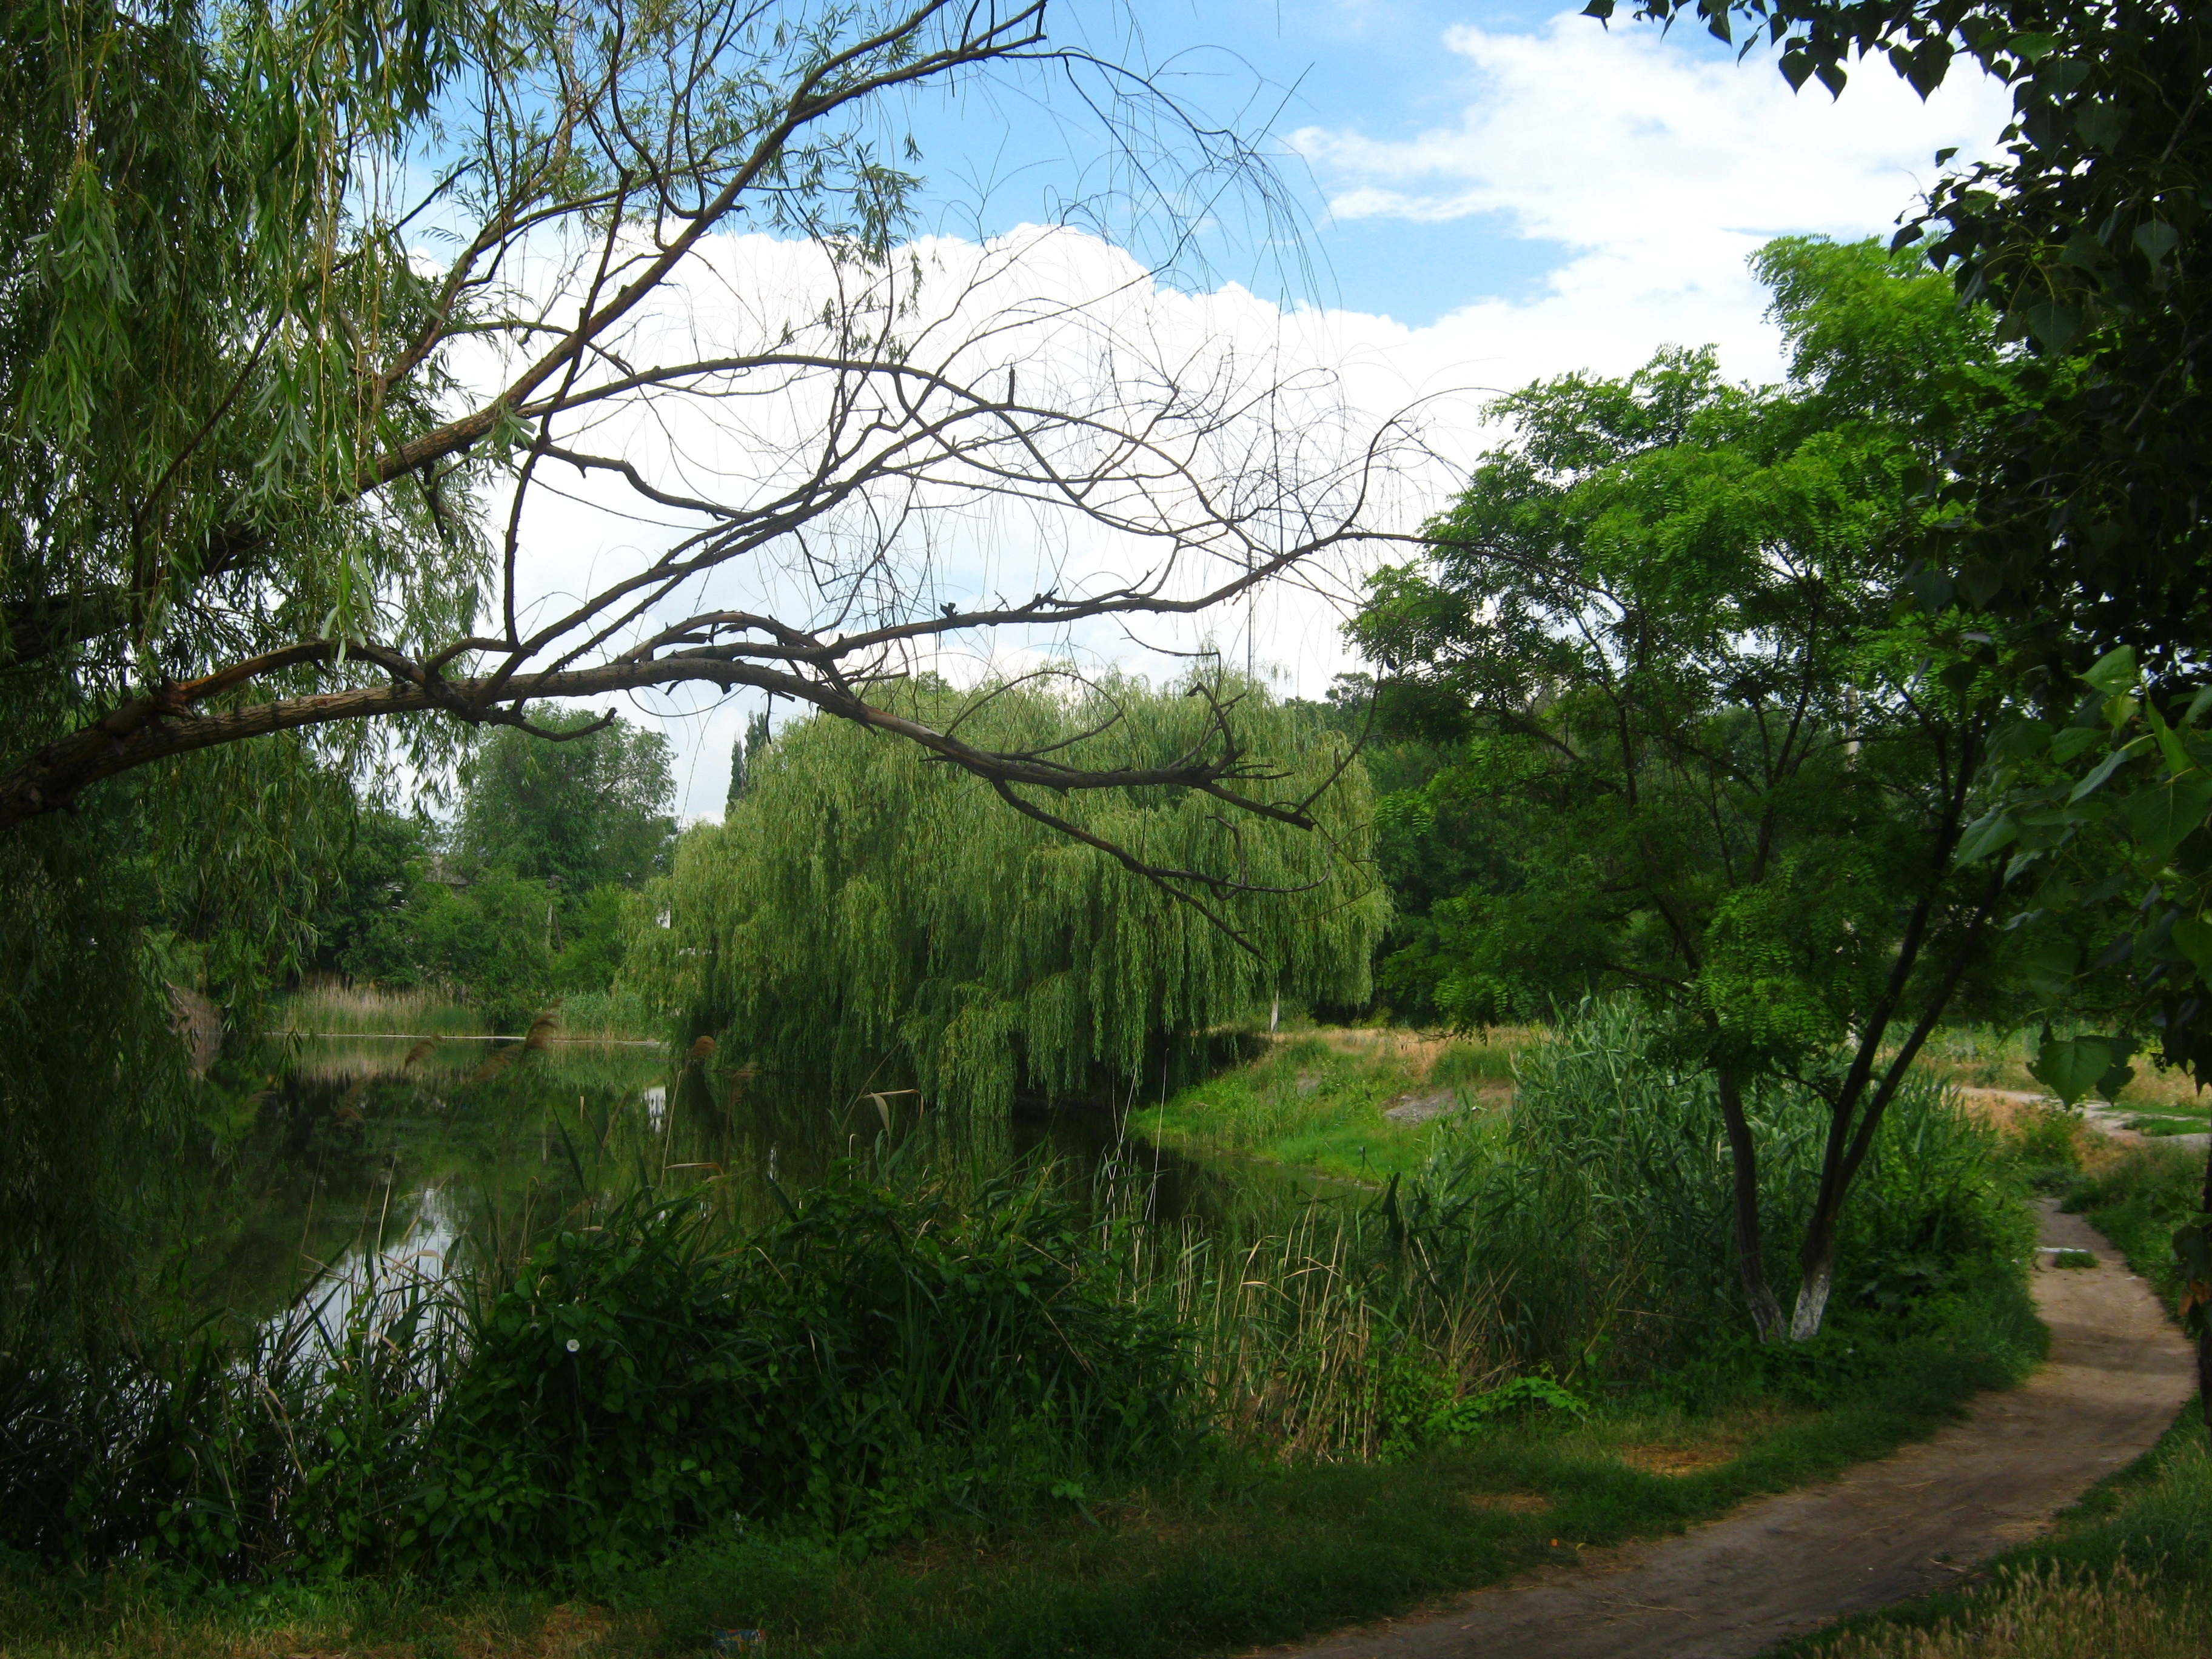 rivers, nature, summer, path, willow, and you Image for desktop